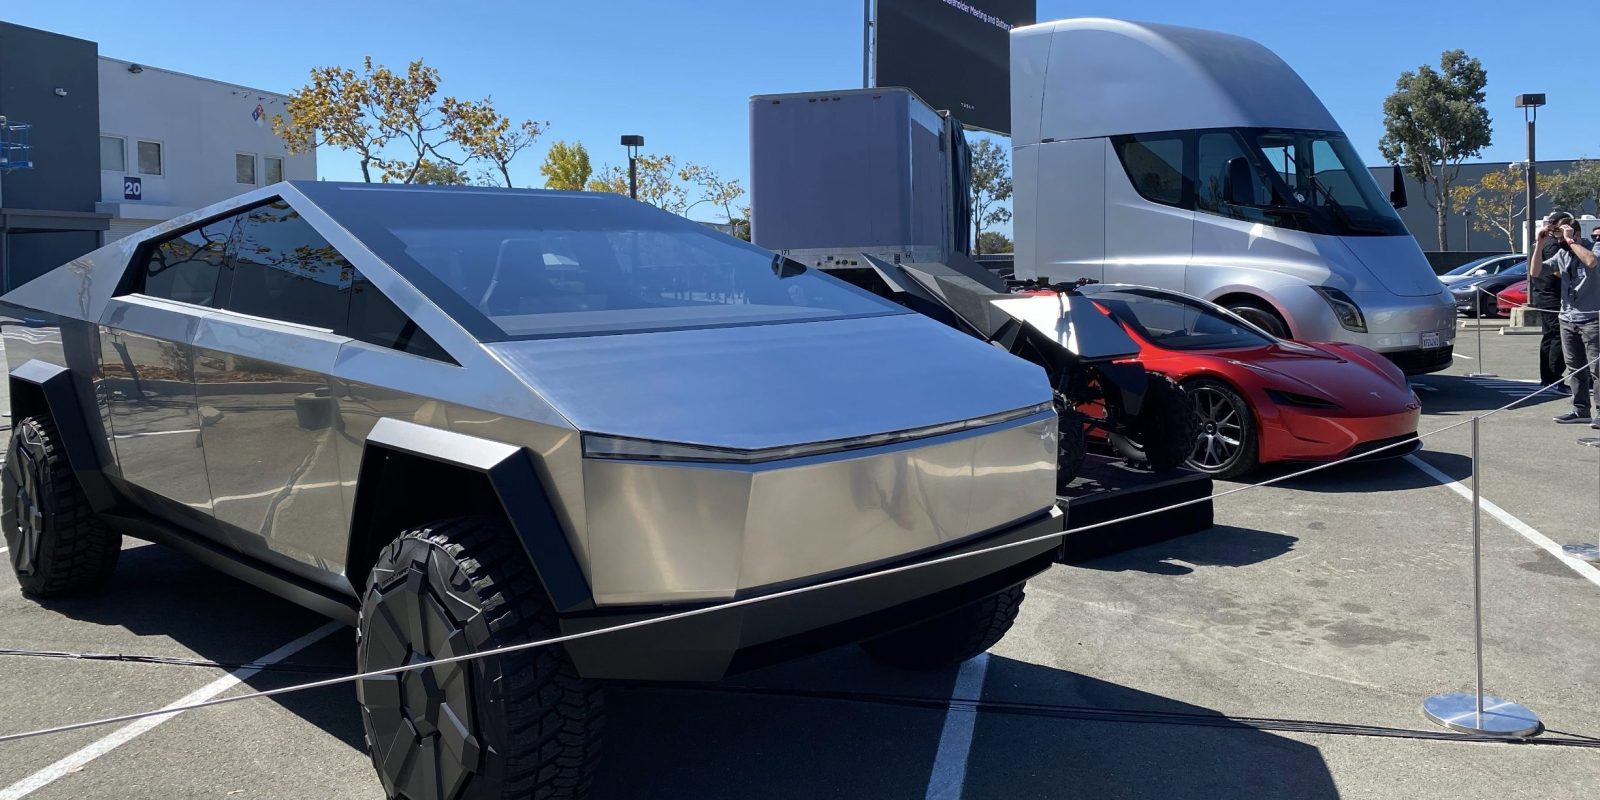 Tesla brings Roadster, Cybertruck prototypes and more to Battery Day [Gallery] - Electrek